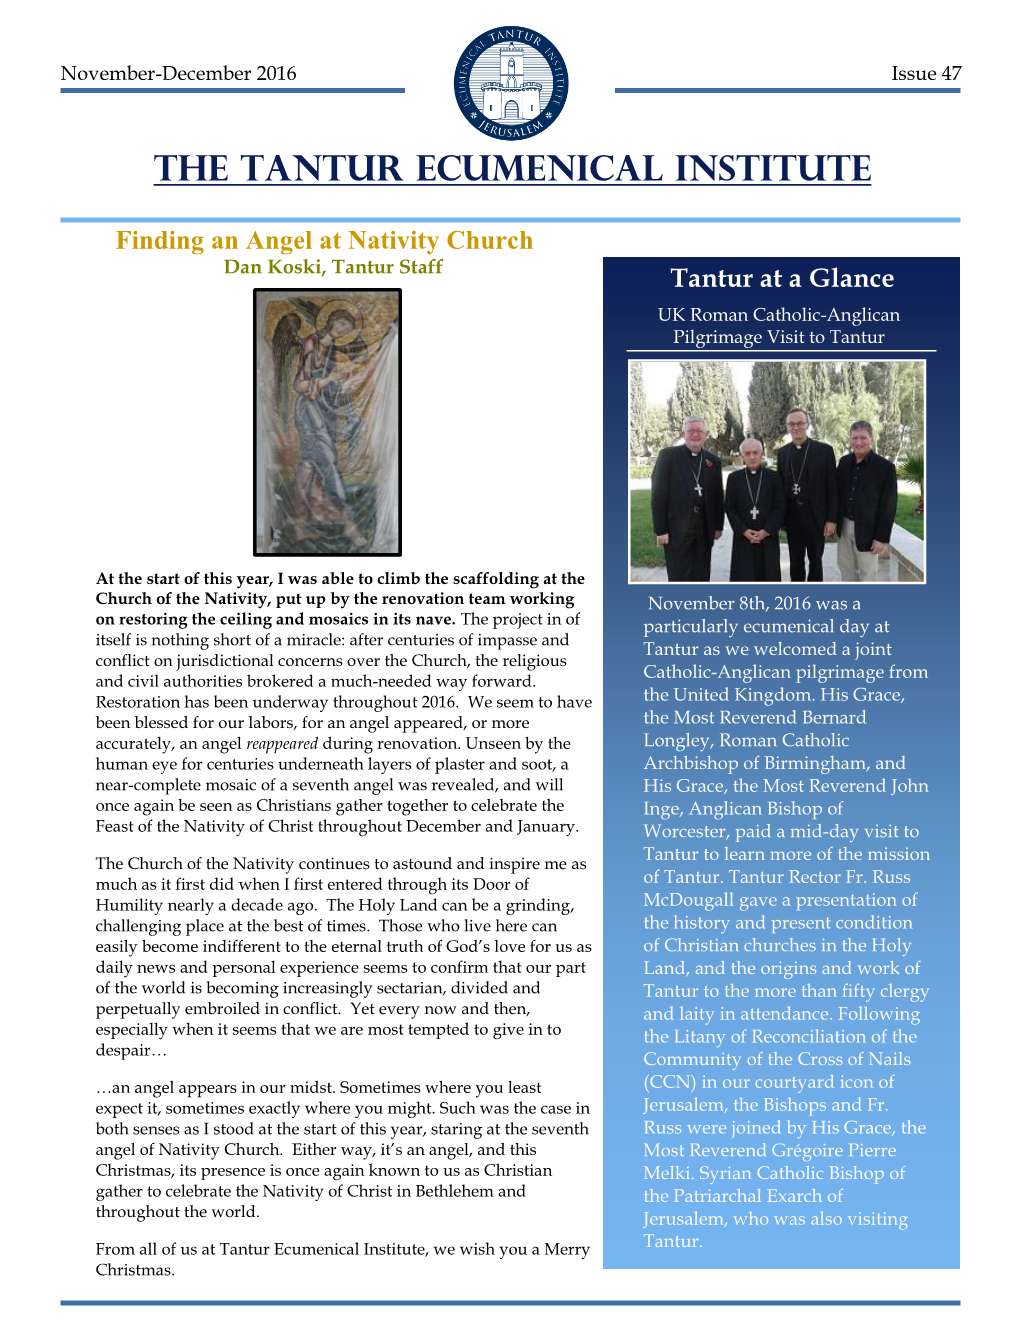 THE TANTUR ECUMENICAL INSTITUTE Finding an Angel At